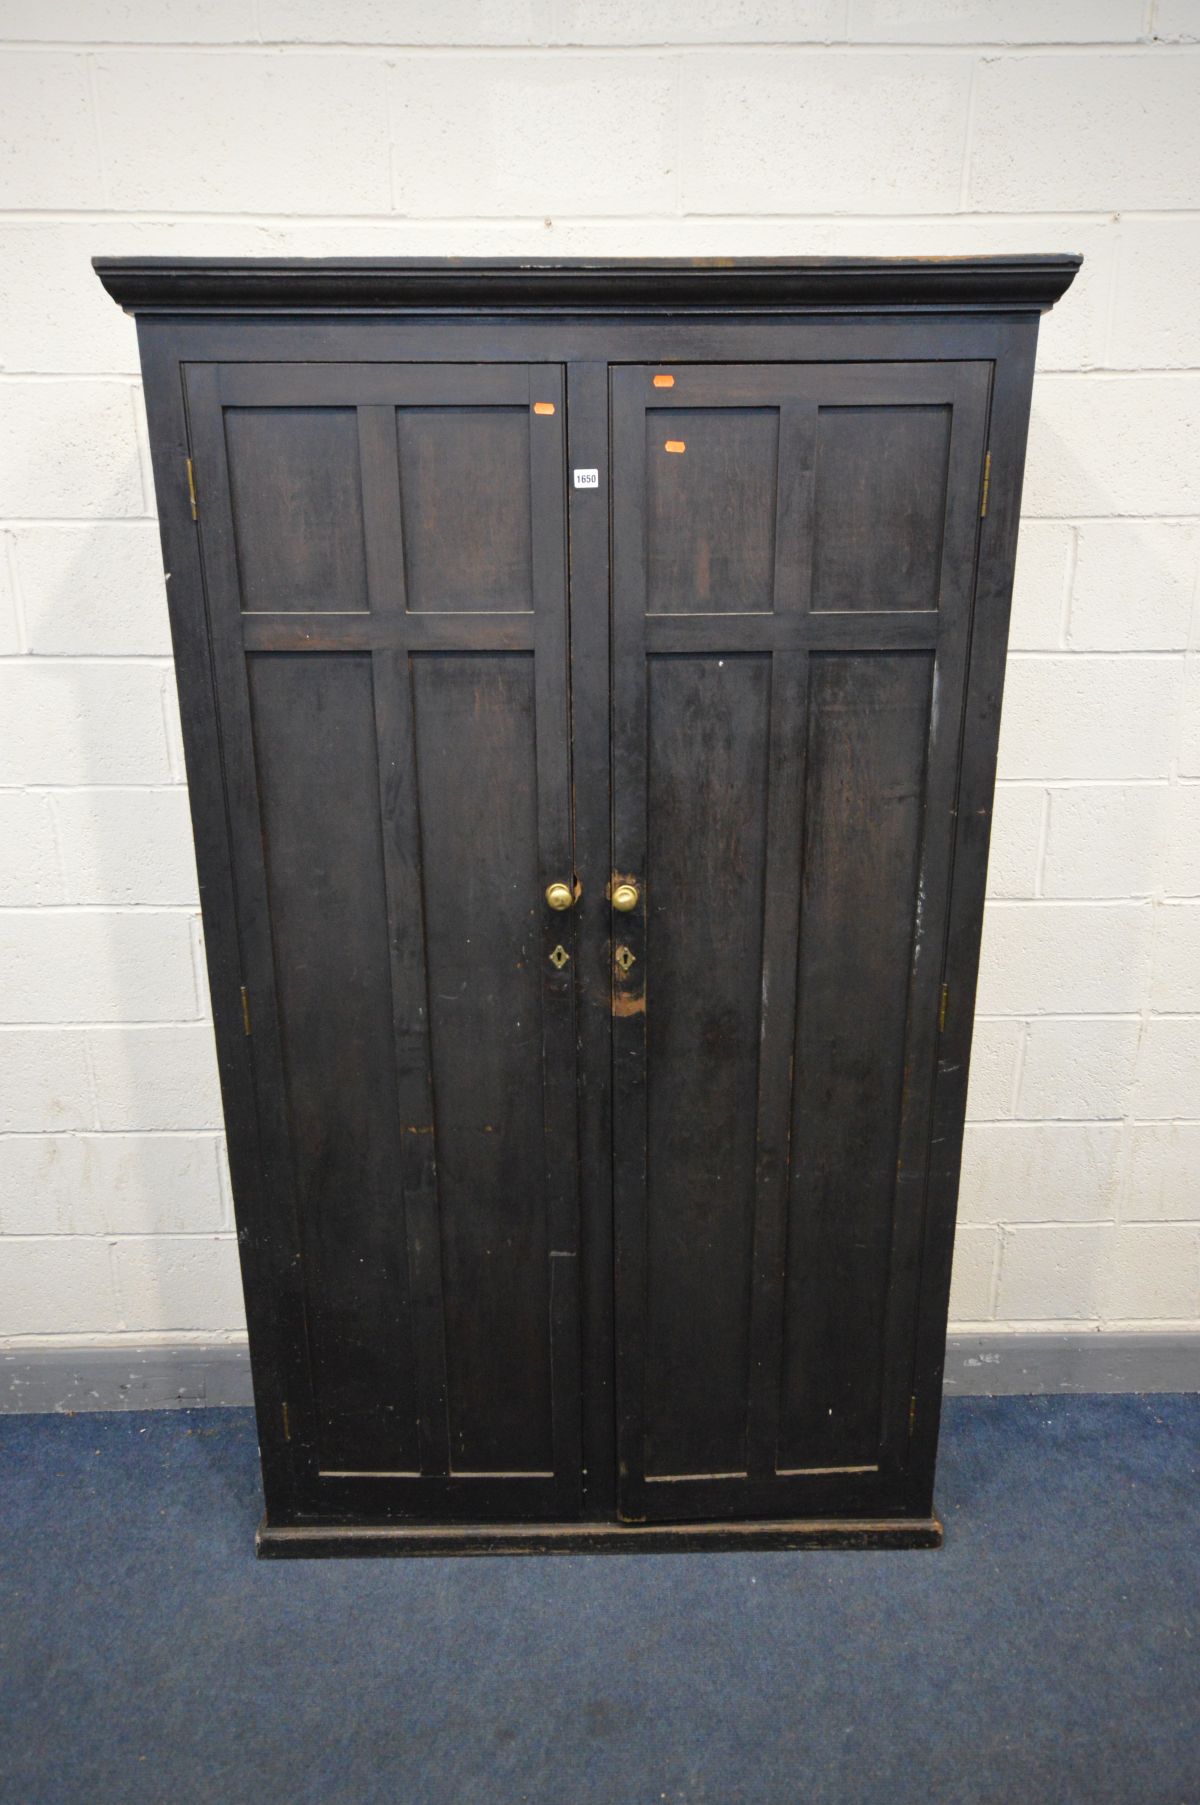 AN EARLY 20TH CENTURY STAINED PINE CUPBOARD, with double panelled doors enclosing ten divisions,